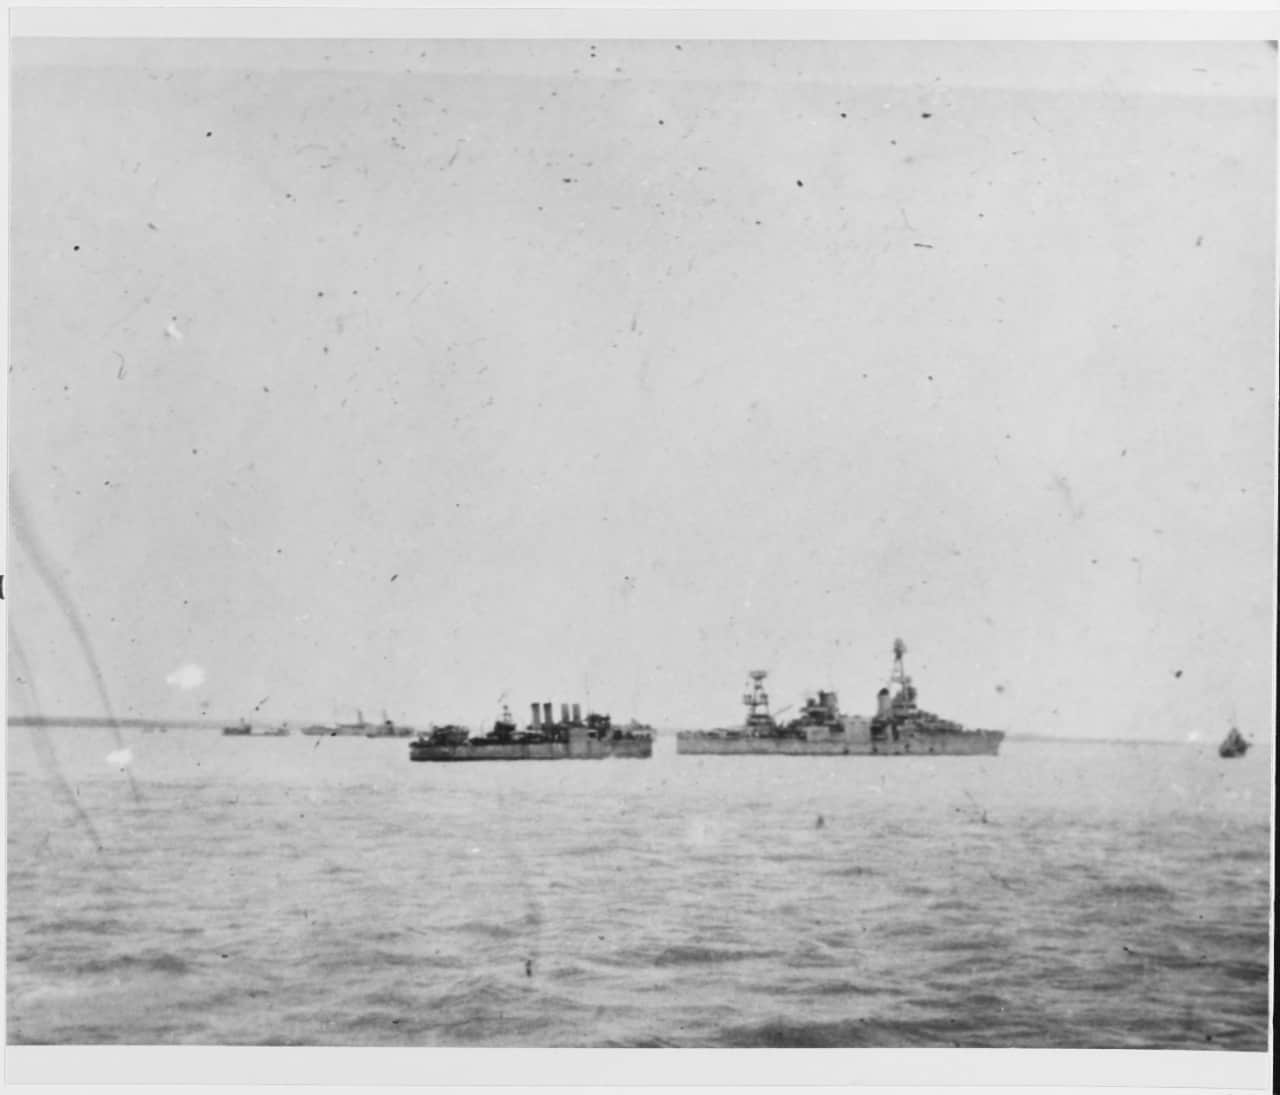 At Darwin, Australia, probably on 15 or 18 February 1942. The destroyer astern of Houston may be USS Peary (DD-226). Among the ships in the background, to the left, are HMAS Terka and the SS Zealandia. (US Navy)